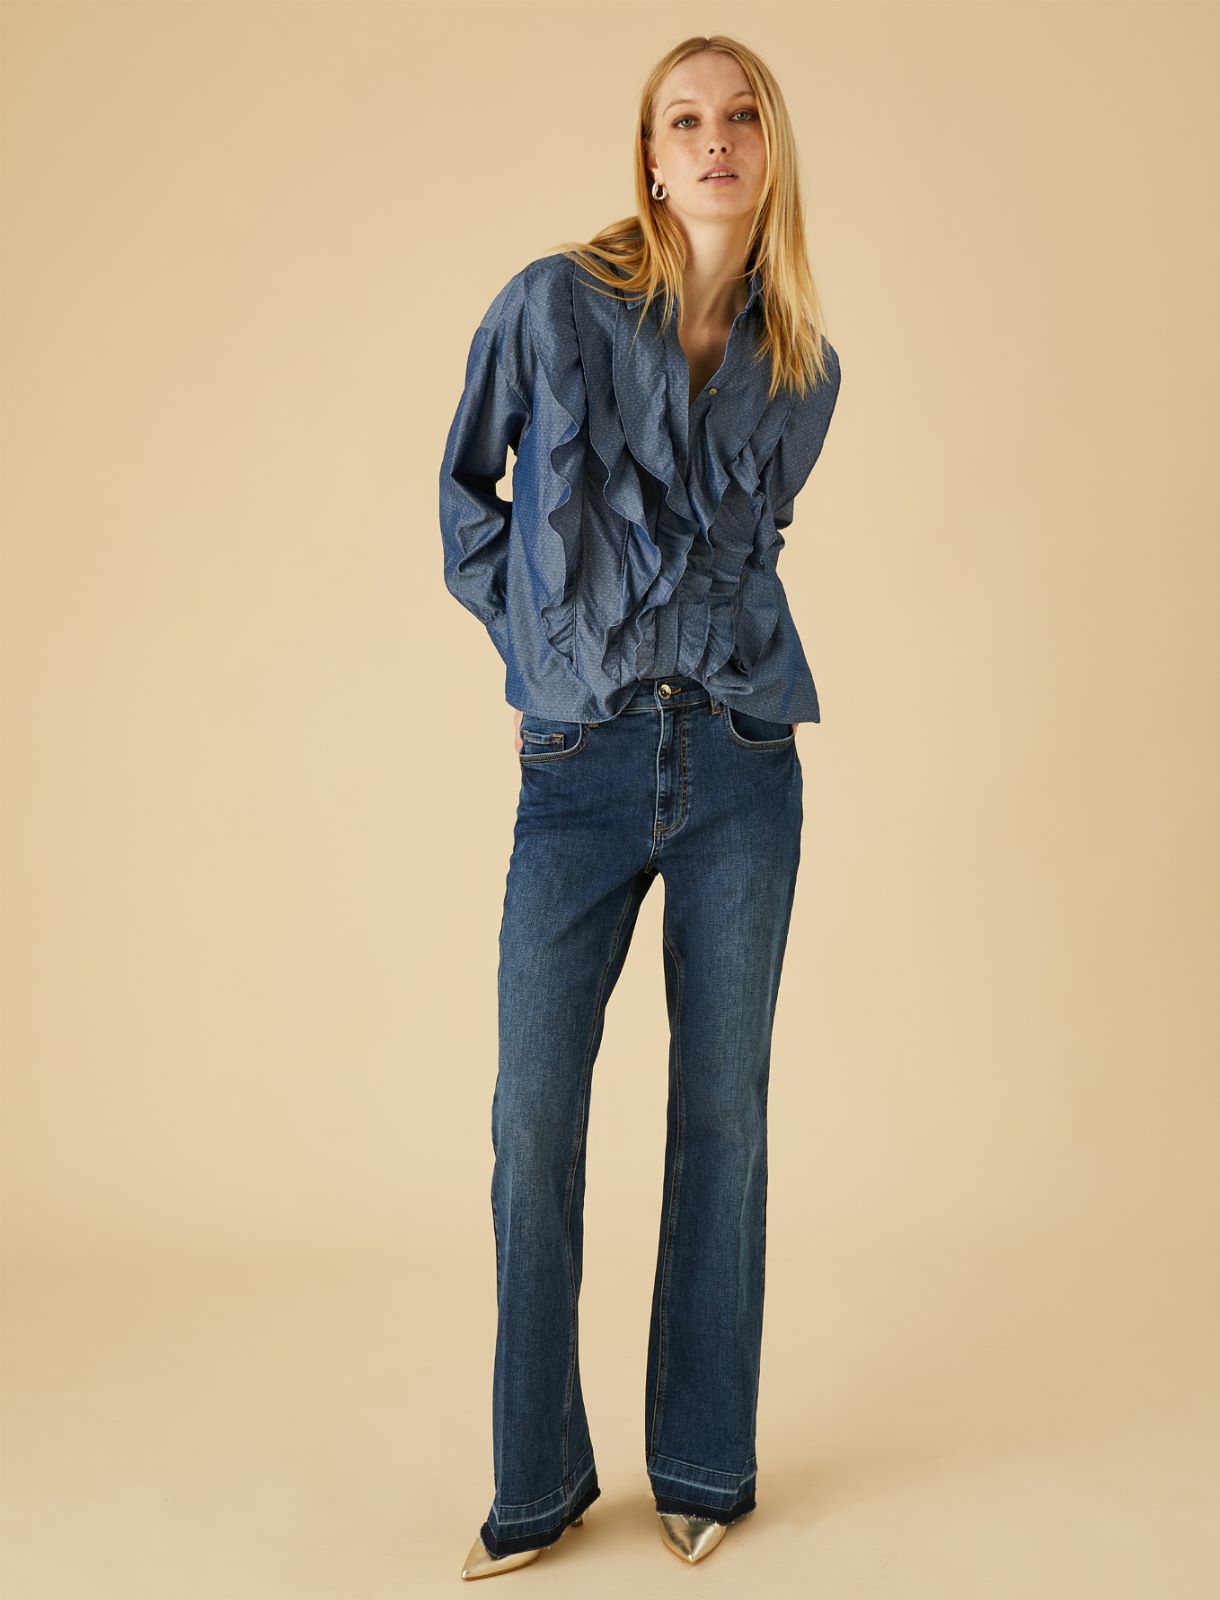 Ruched shirt - Blue jeans - Marella